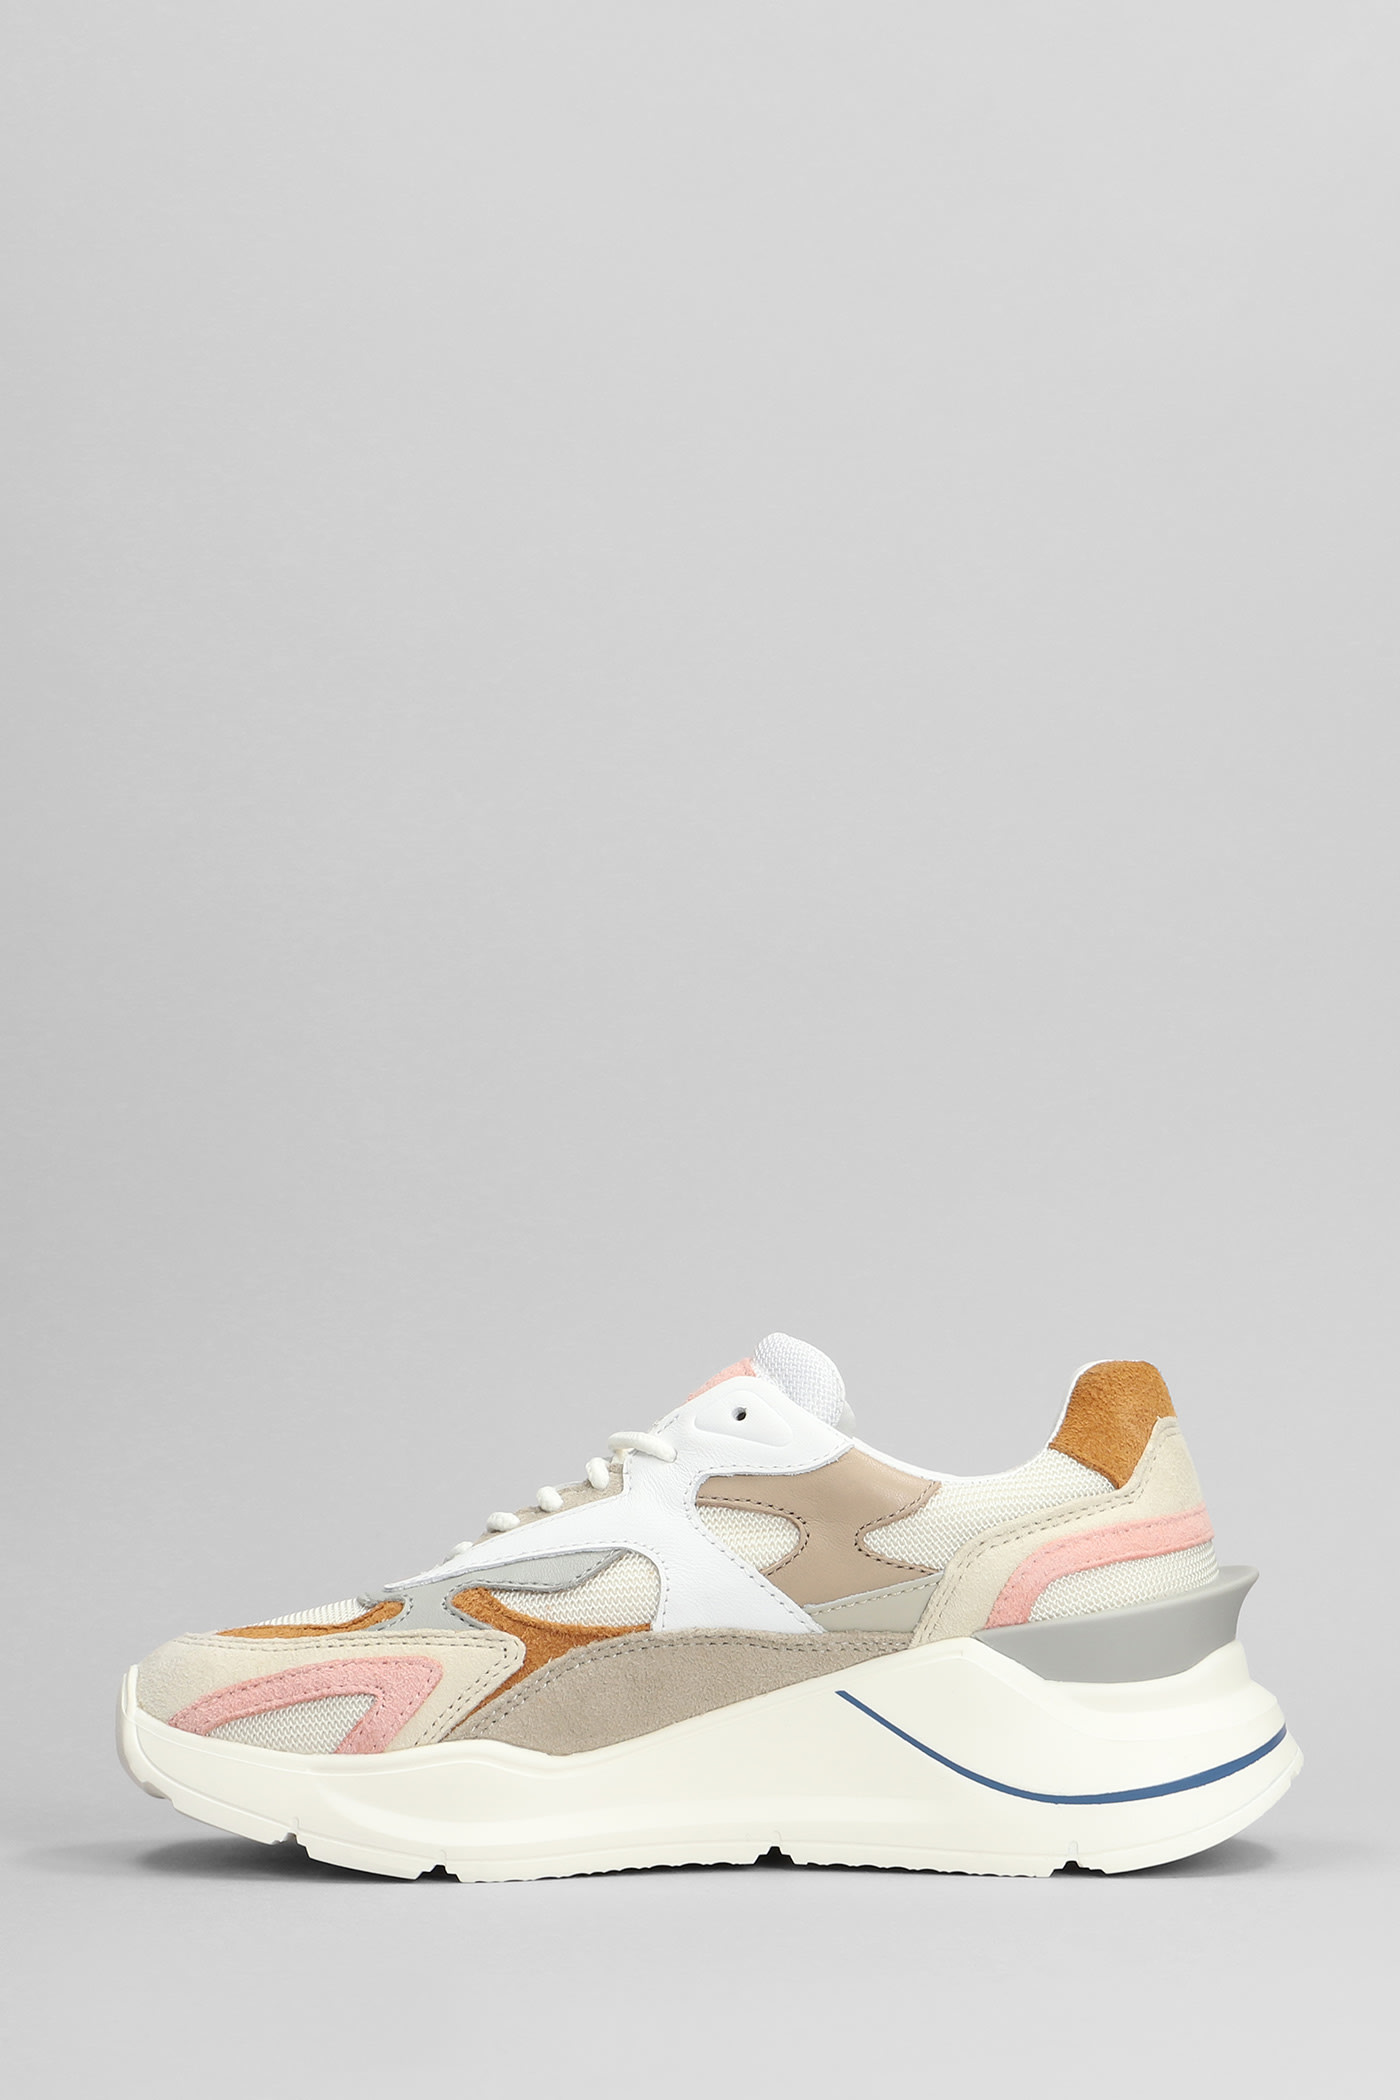 Shop Date Fuga Sneakers In Beige Suede And Fabric